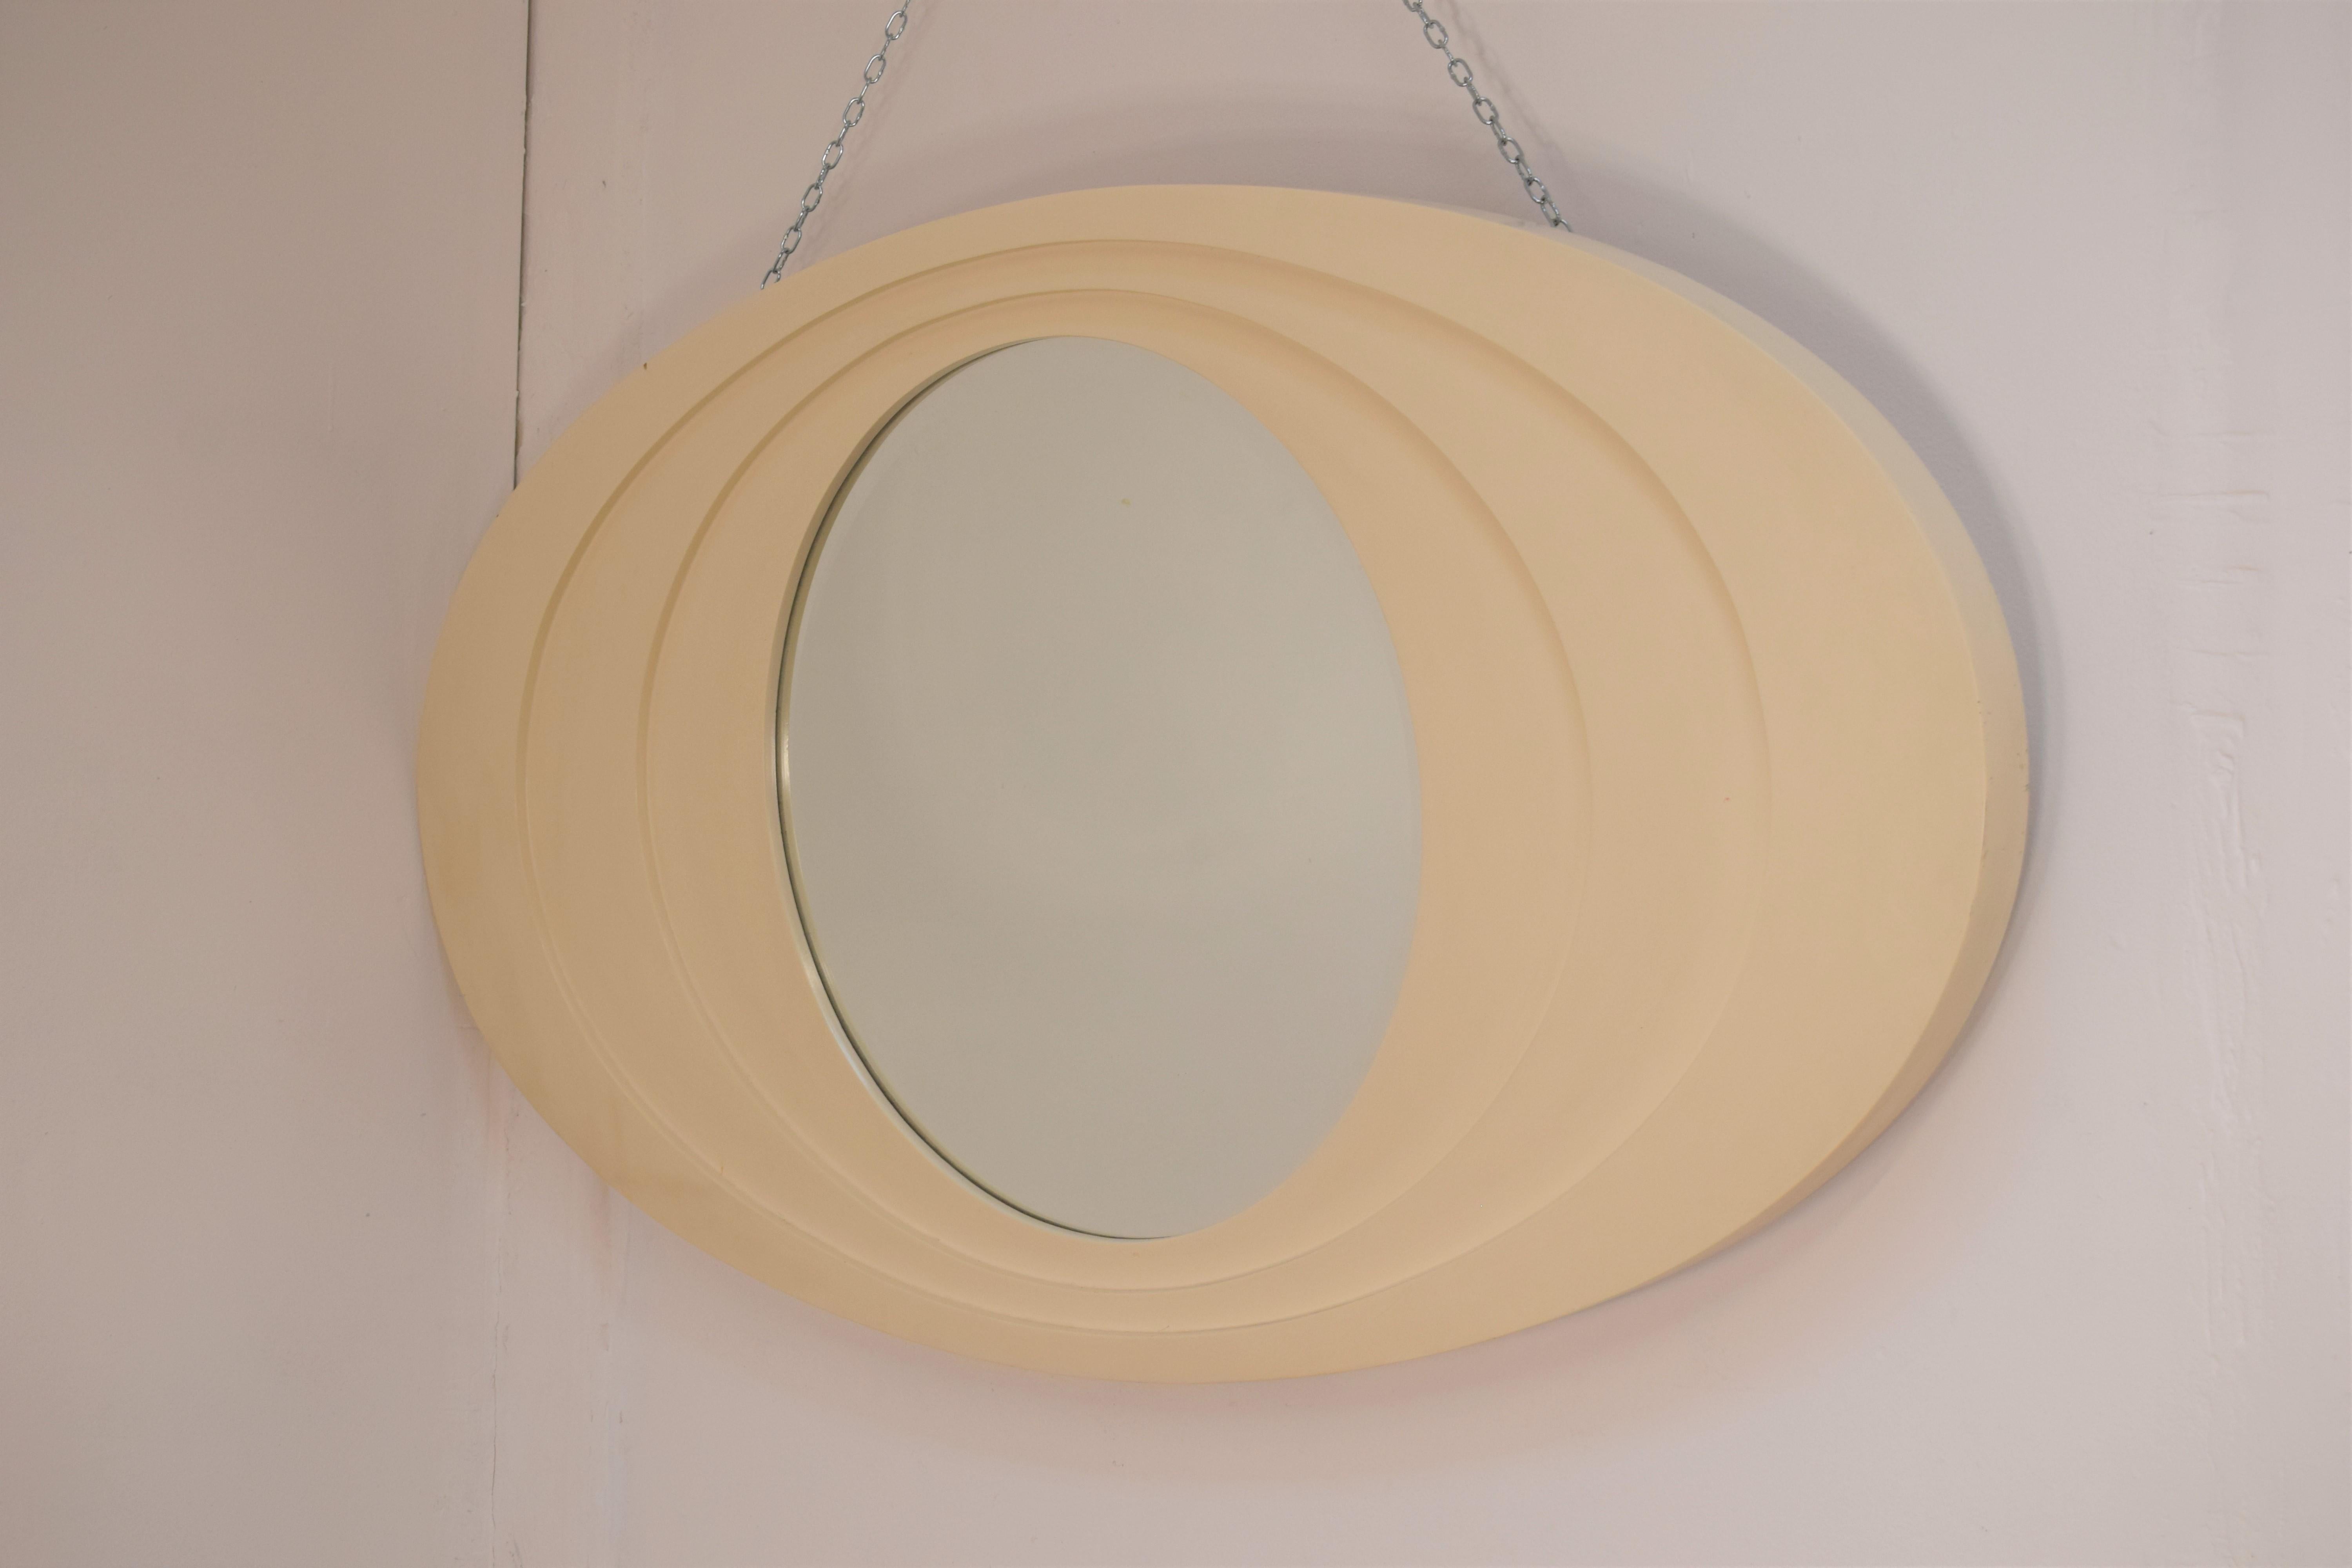 Italian oval mirror, lacquered wood and crystal, 1970s.
Dimensions: H= 68 cm; W= 120 cm; D= 4 cm.